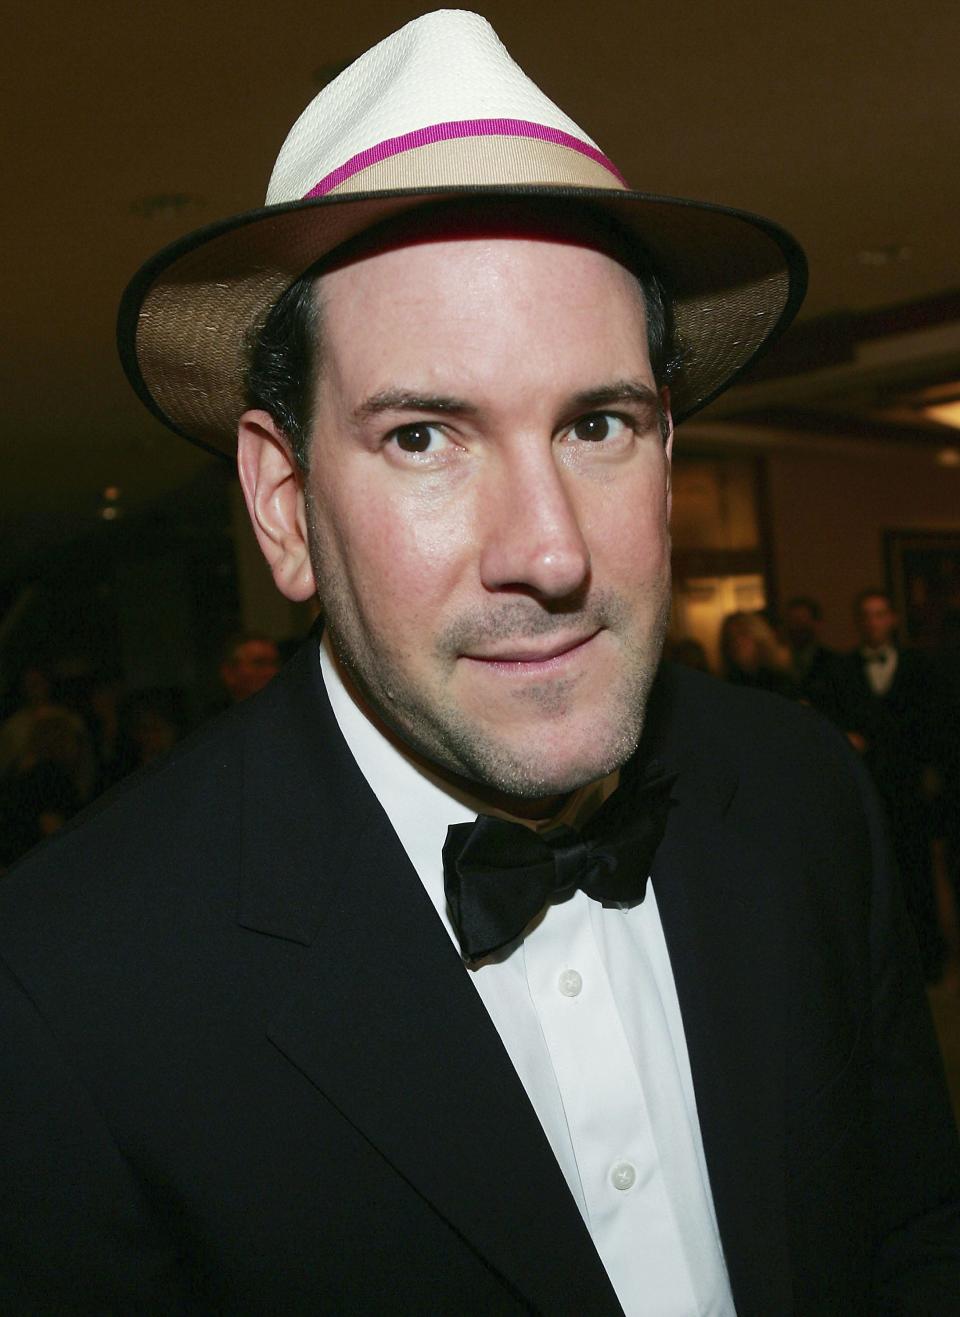 Matt Drudge founded the highly watched Drudge Report in 1995. What began as an email note circulated among friends grew into a popular conservative news website.